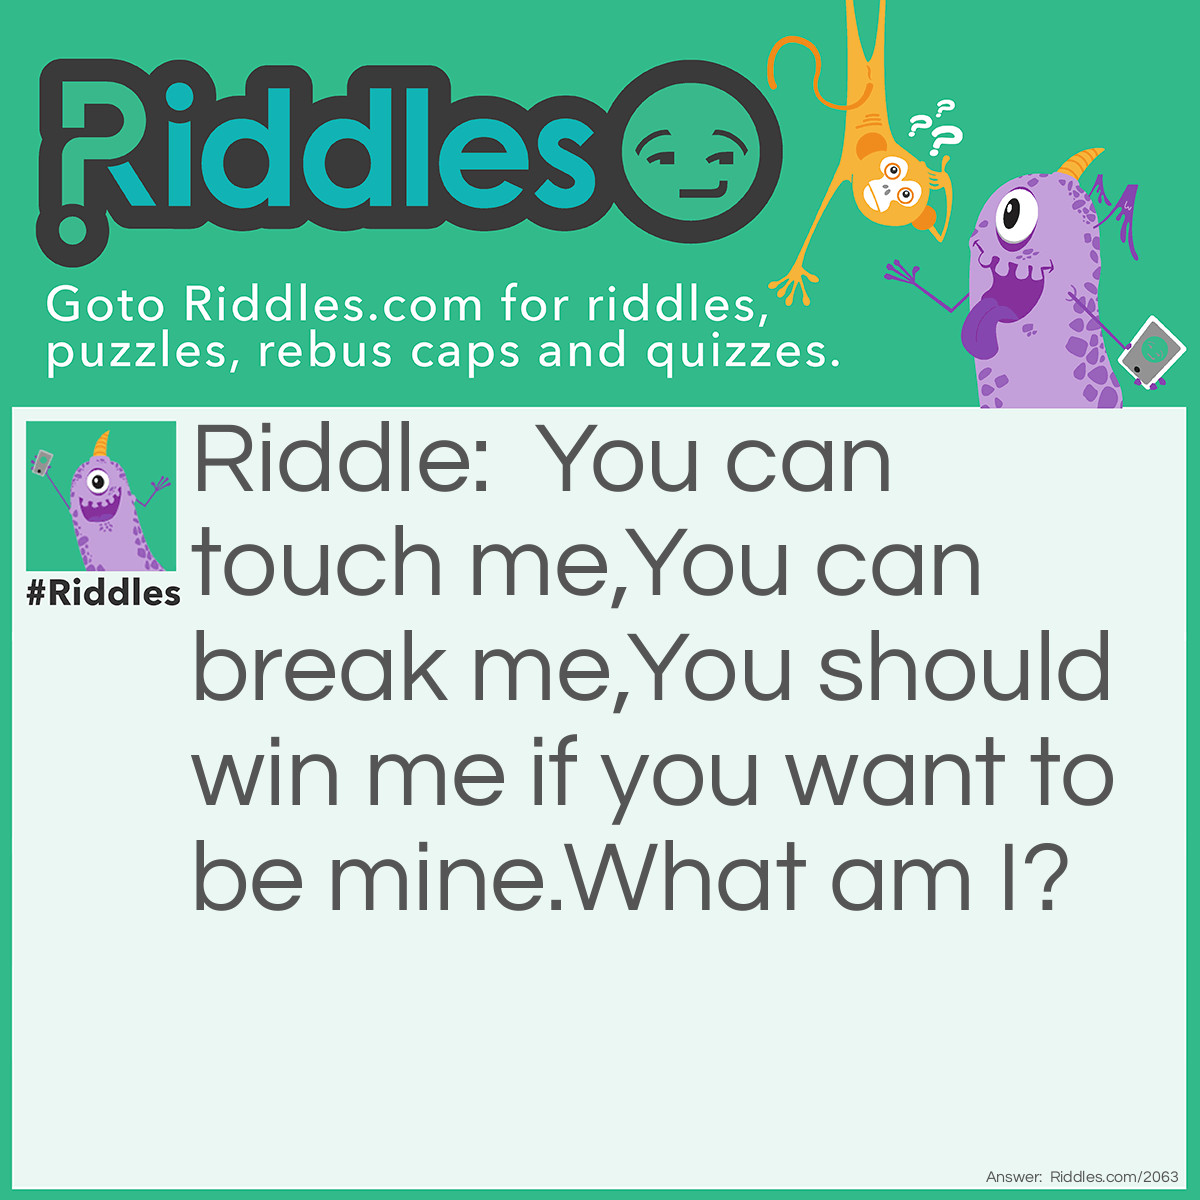 Riddle: You can touch me,
You can break me,
You should win me if you want to be mine.
<a title="What Am I Riddles" href="../../../what-am-i-riddles">What am I</a>? Answer: A heart.